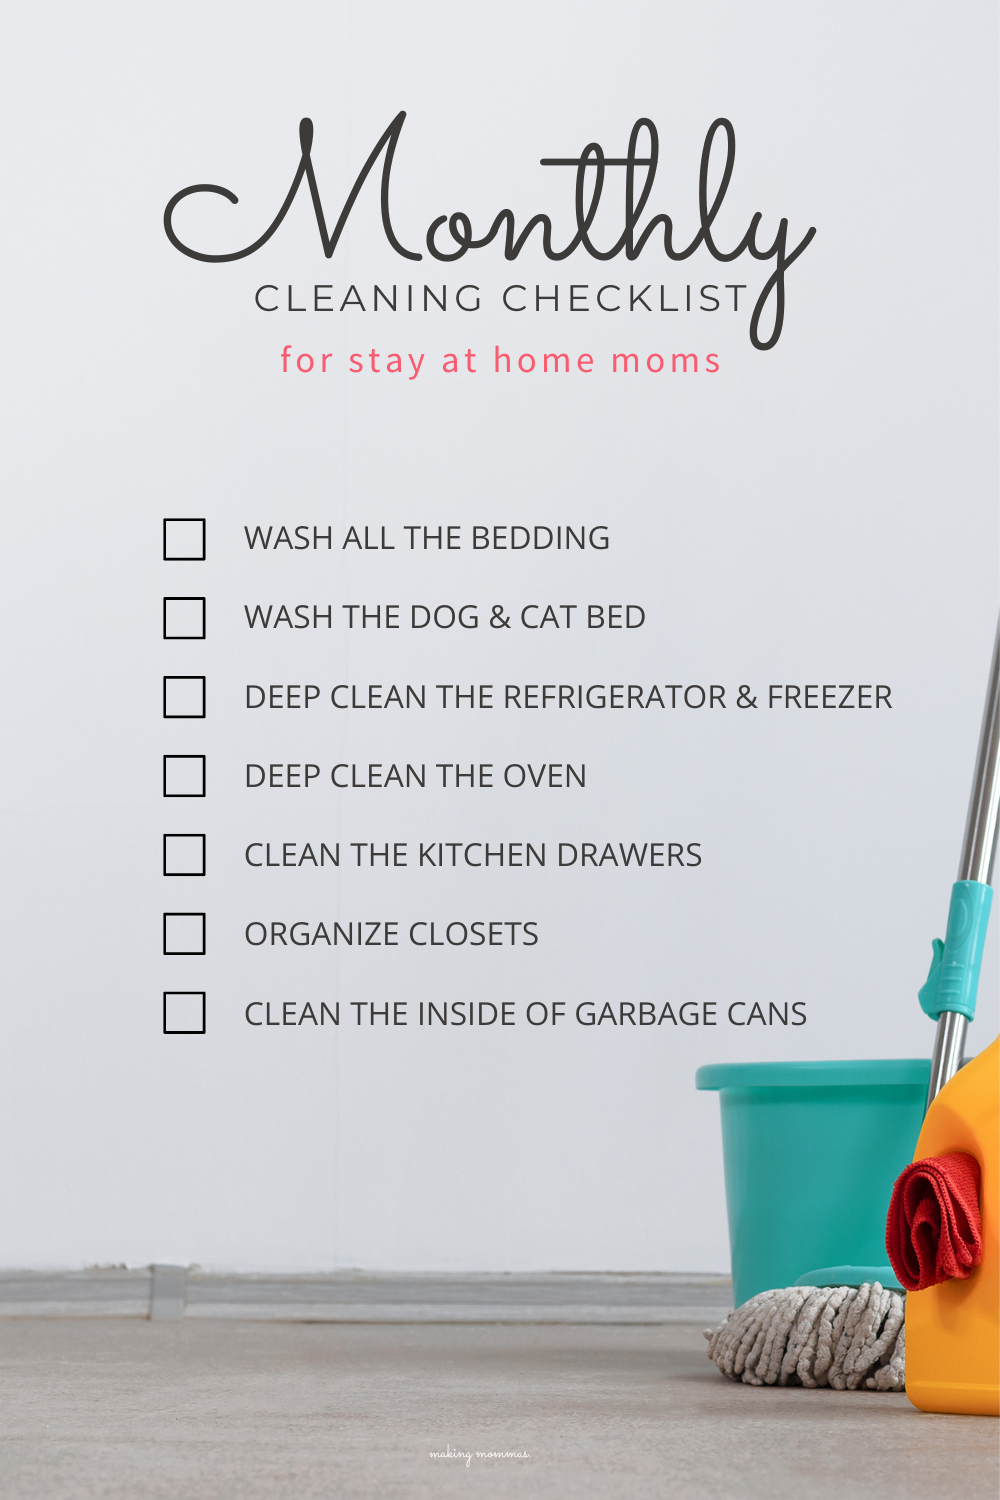 image of a monthly cleaning checklist for stay at home moms